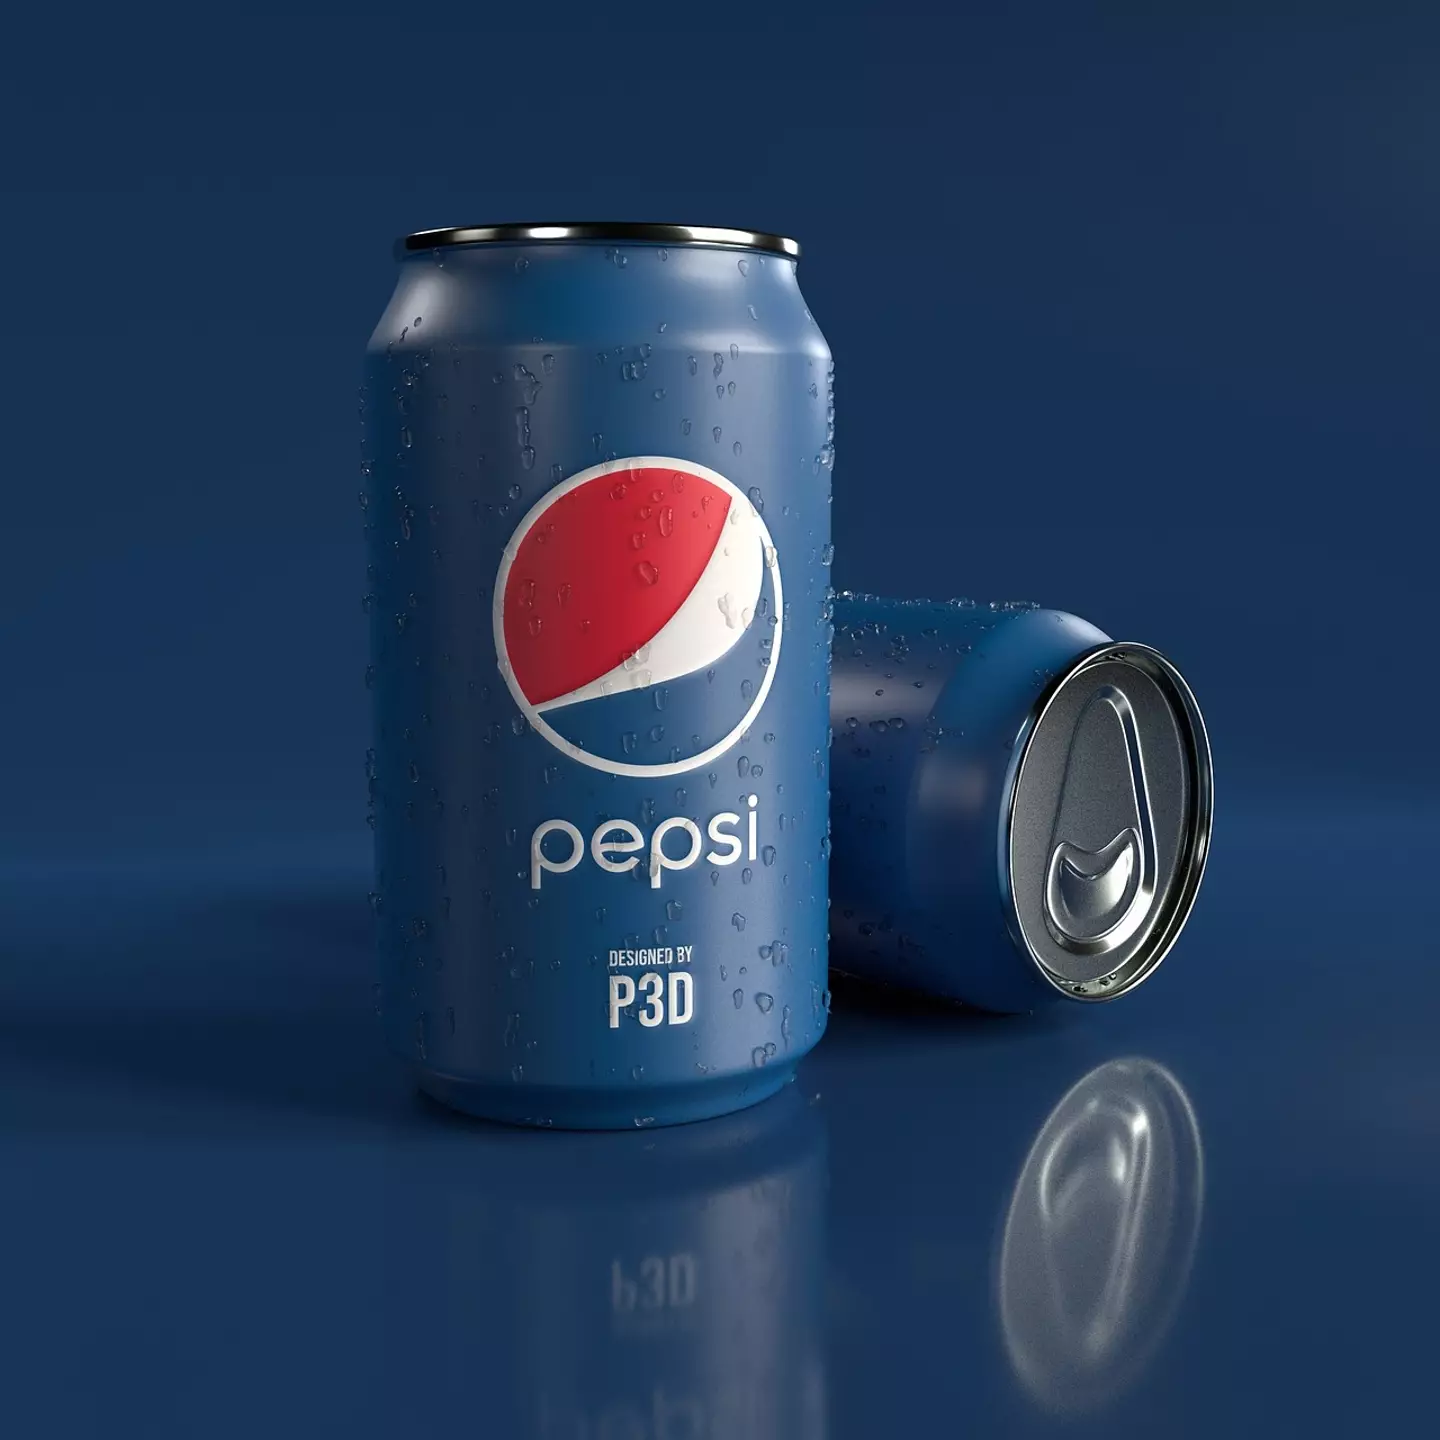 Why is it called Pepsi?